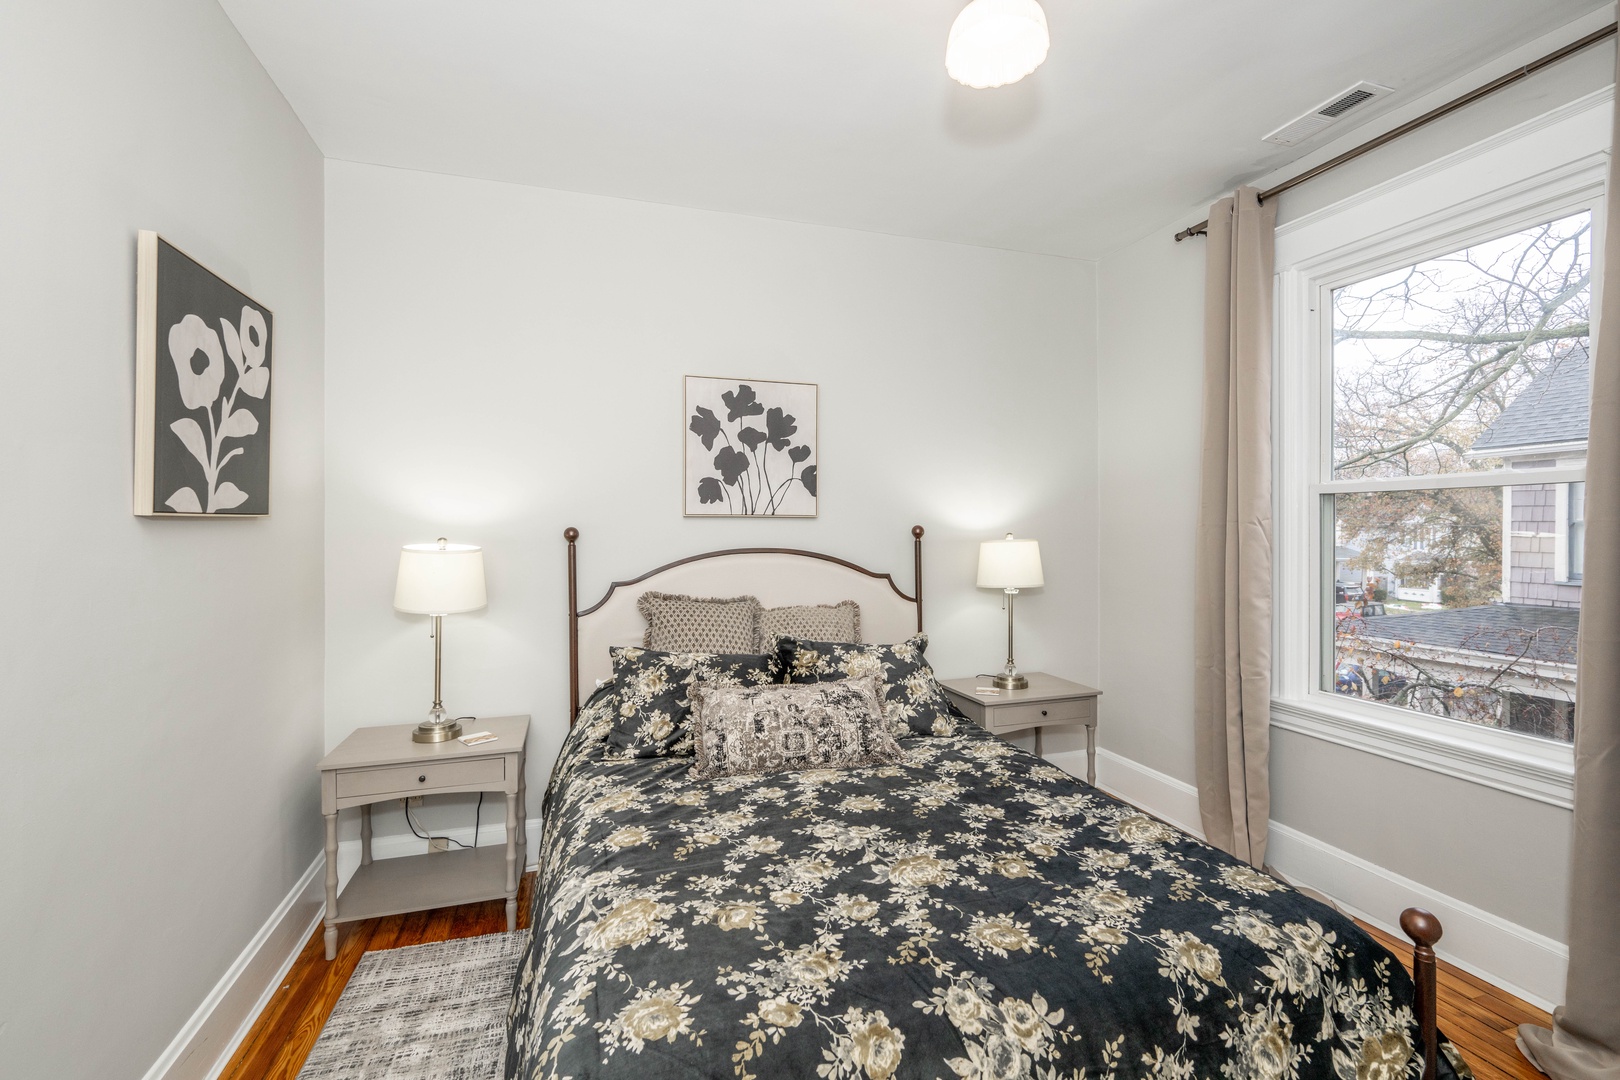 The second bedroom includes a comfy queen-sized bed